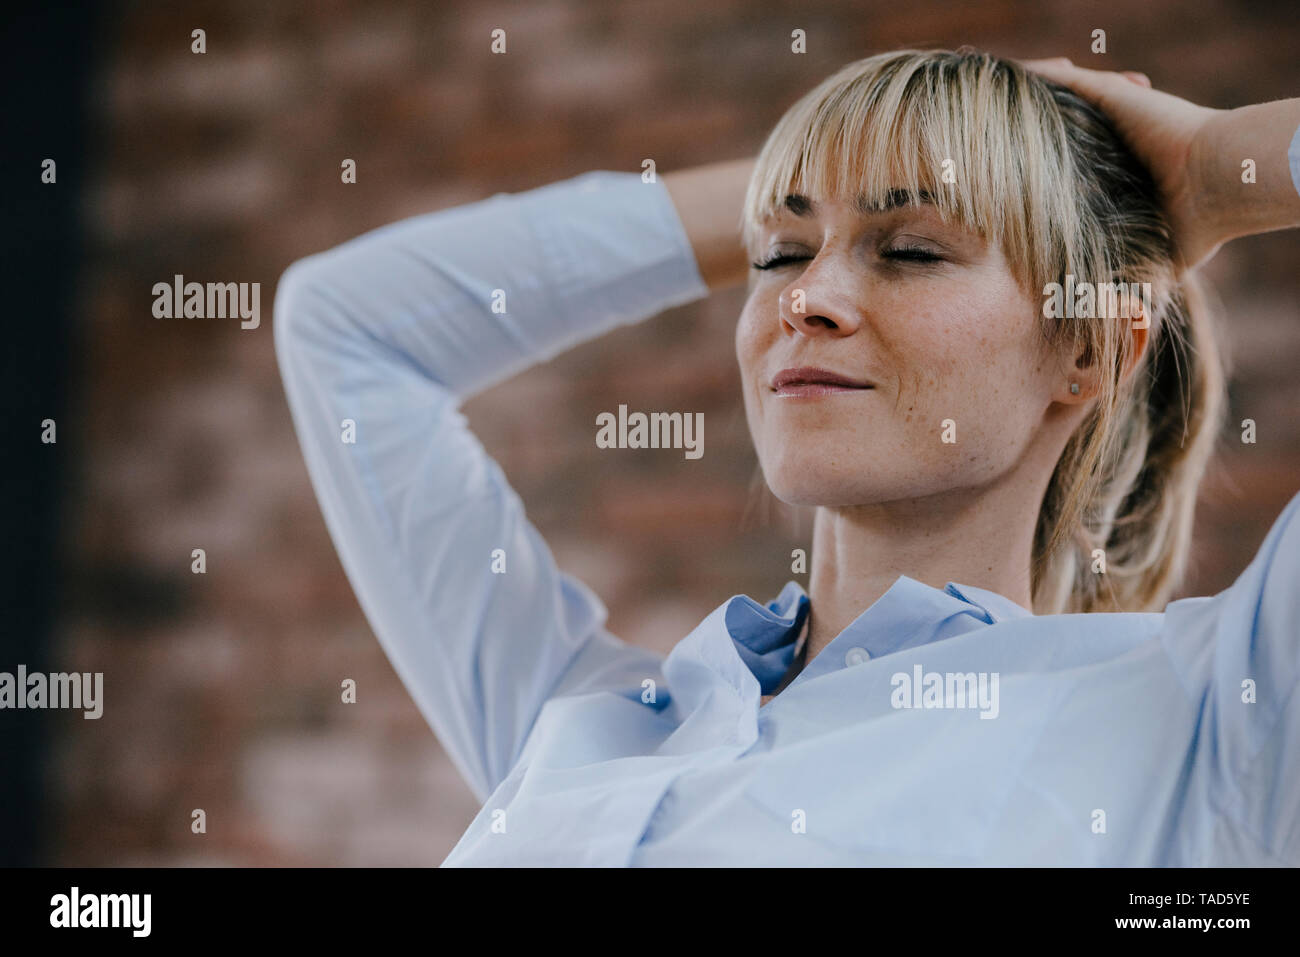 Businesswoman relaxing in office, with hands behind head Stock Photo